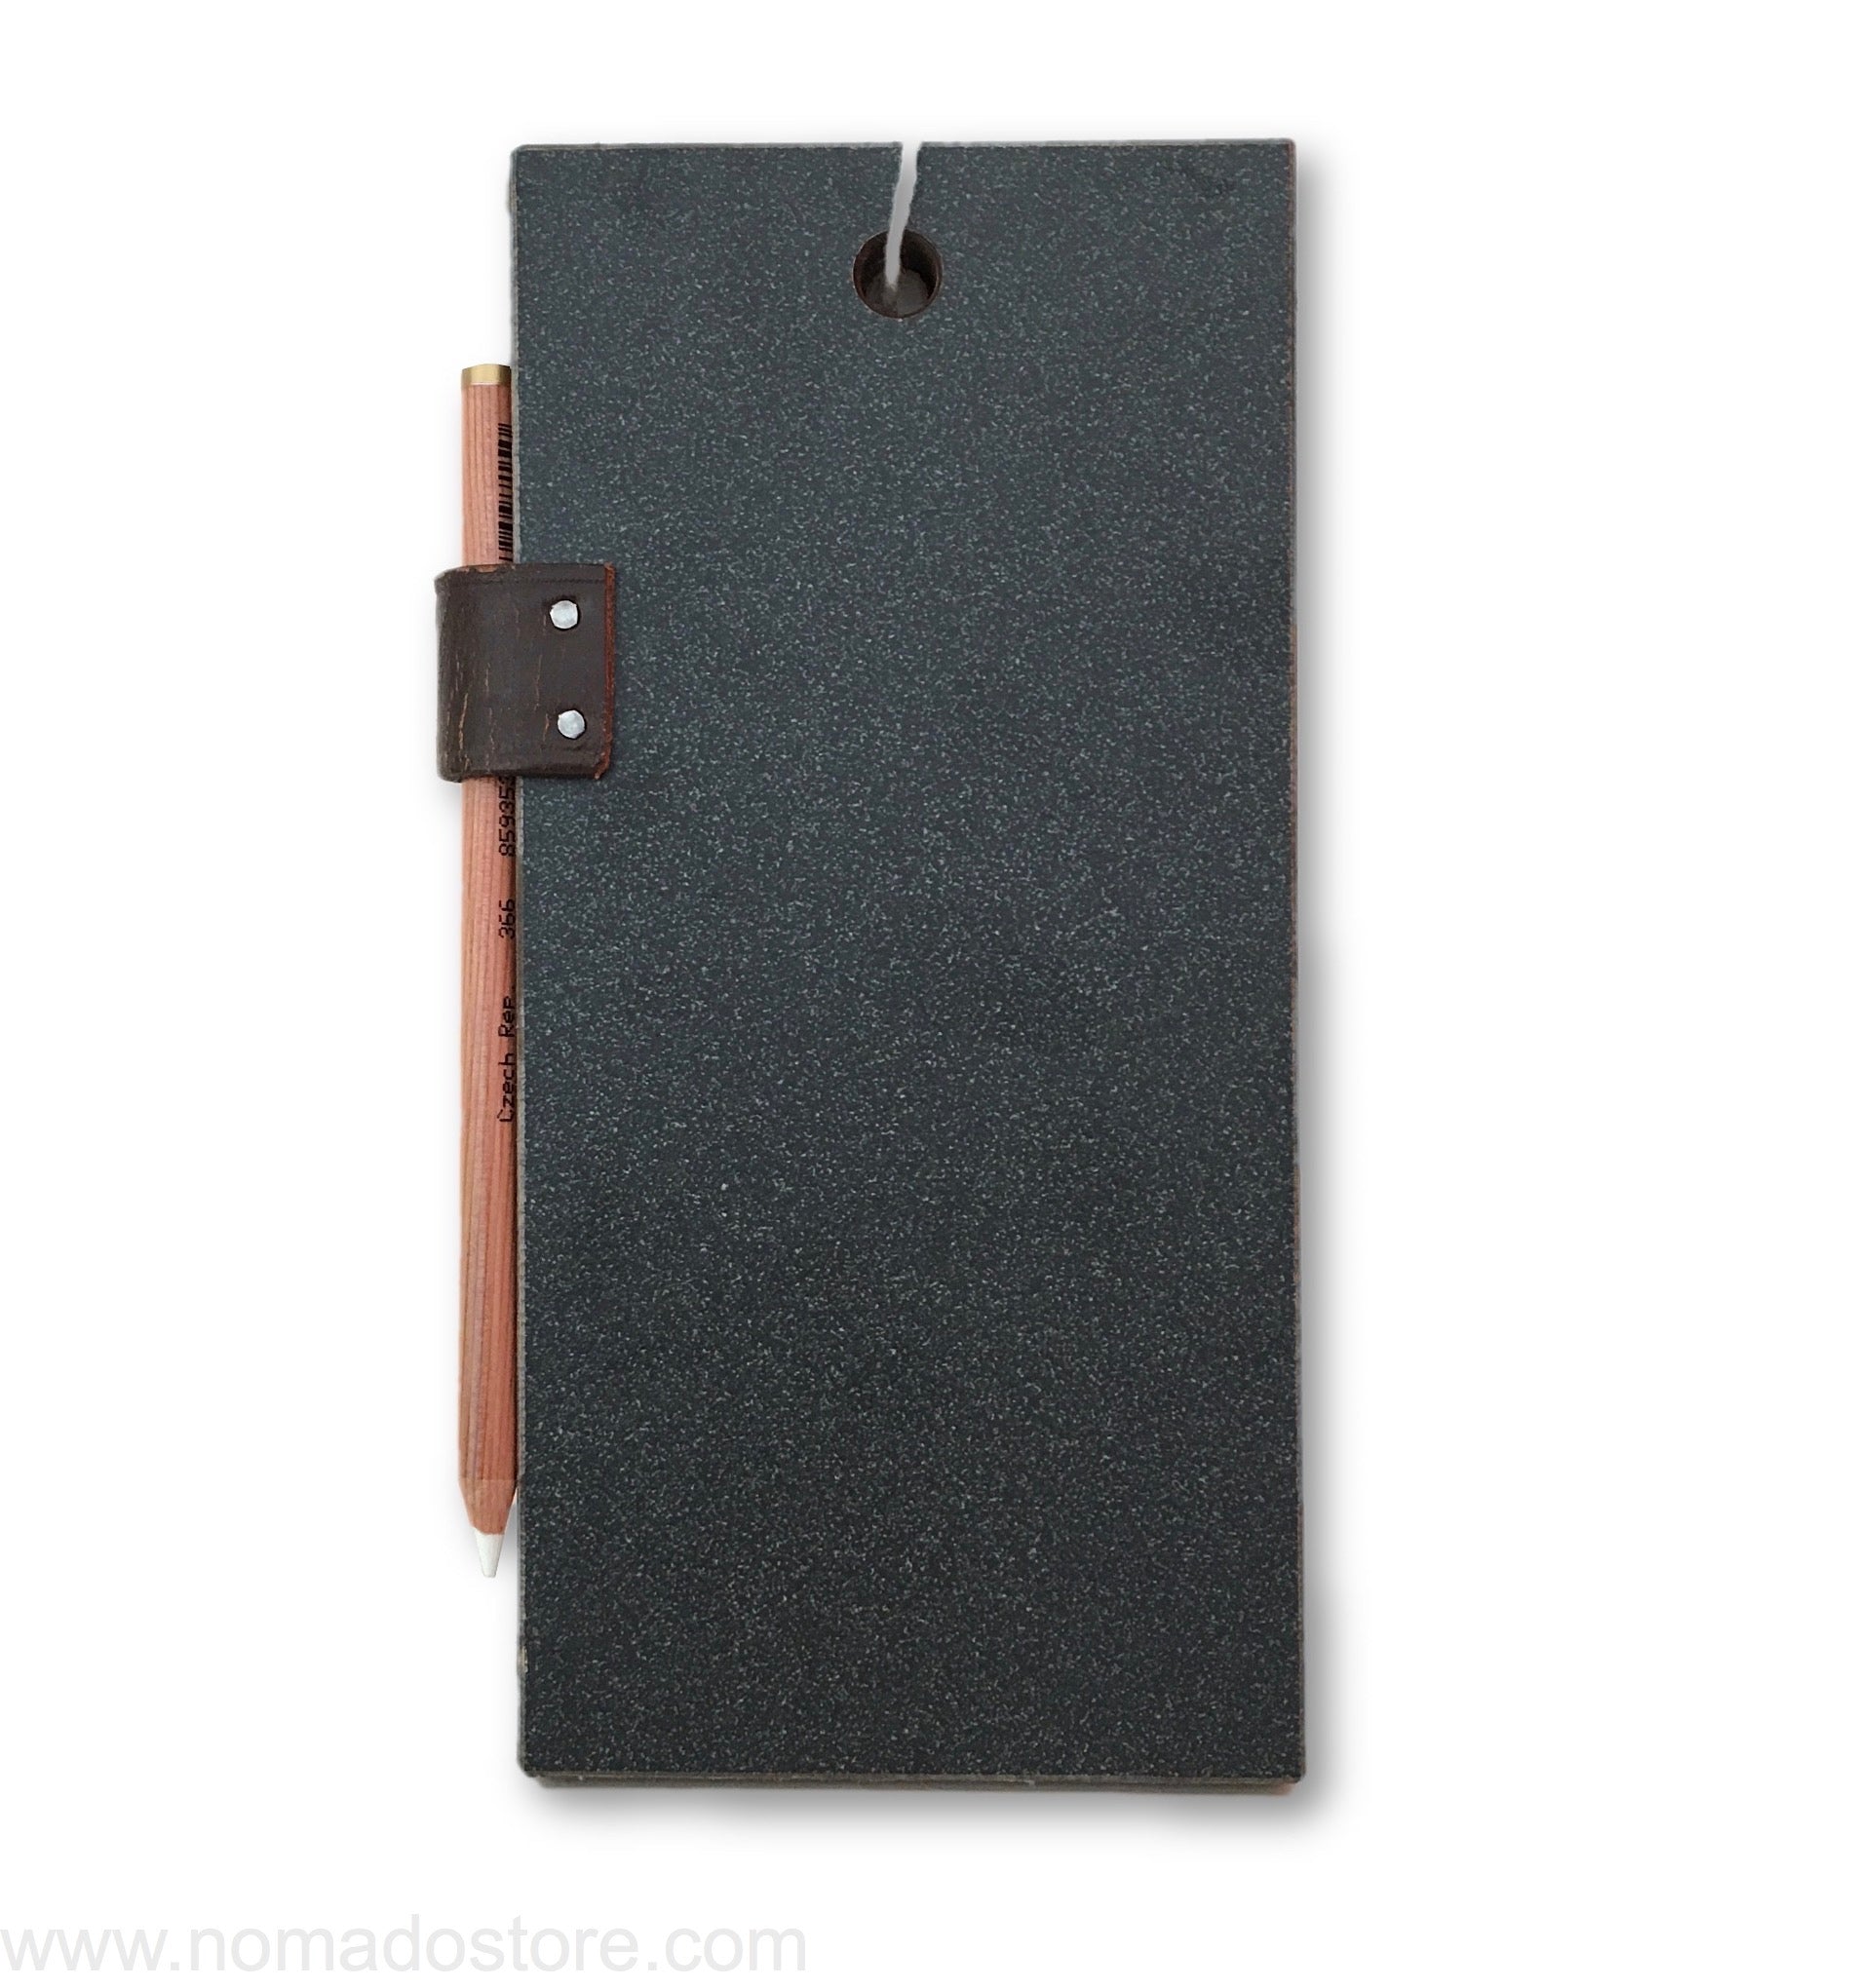 Peg and Awl Chalk Tablet - NOMADO Store 